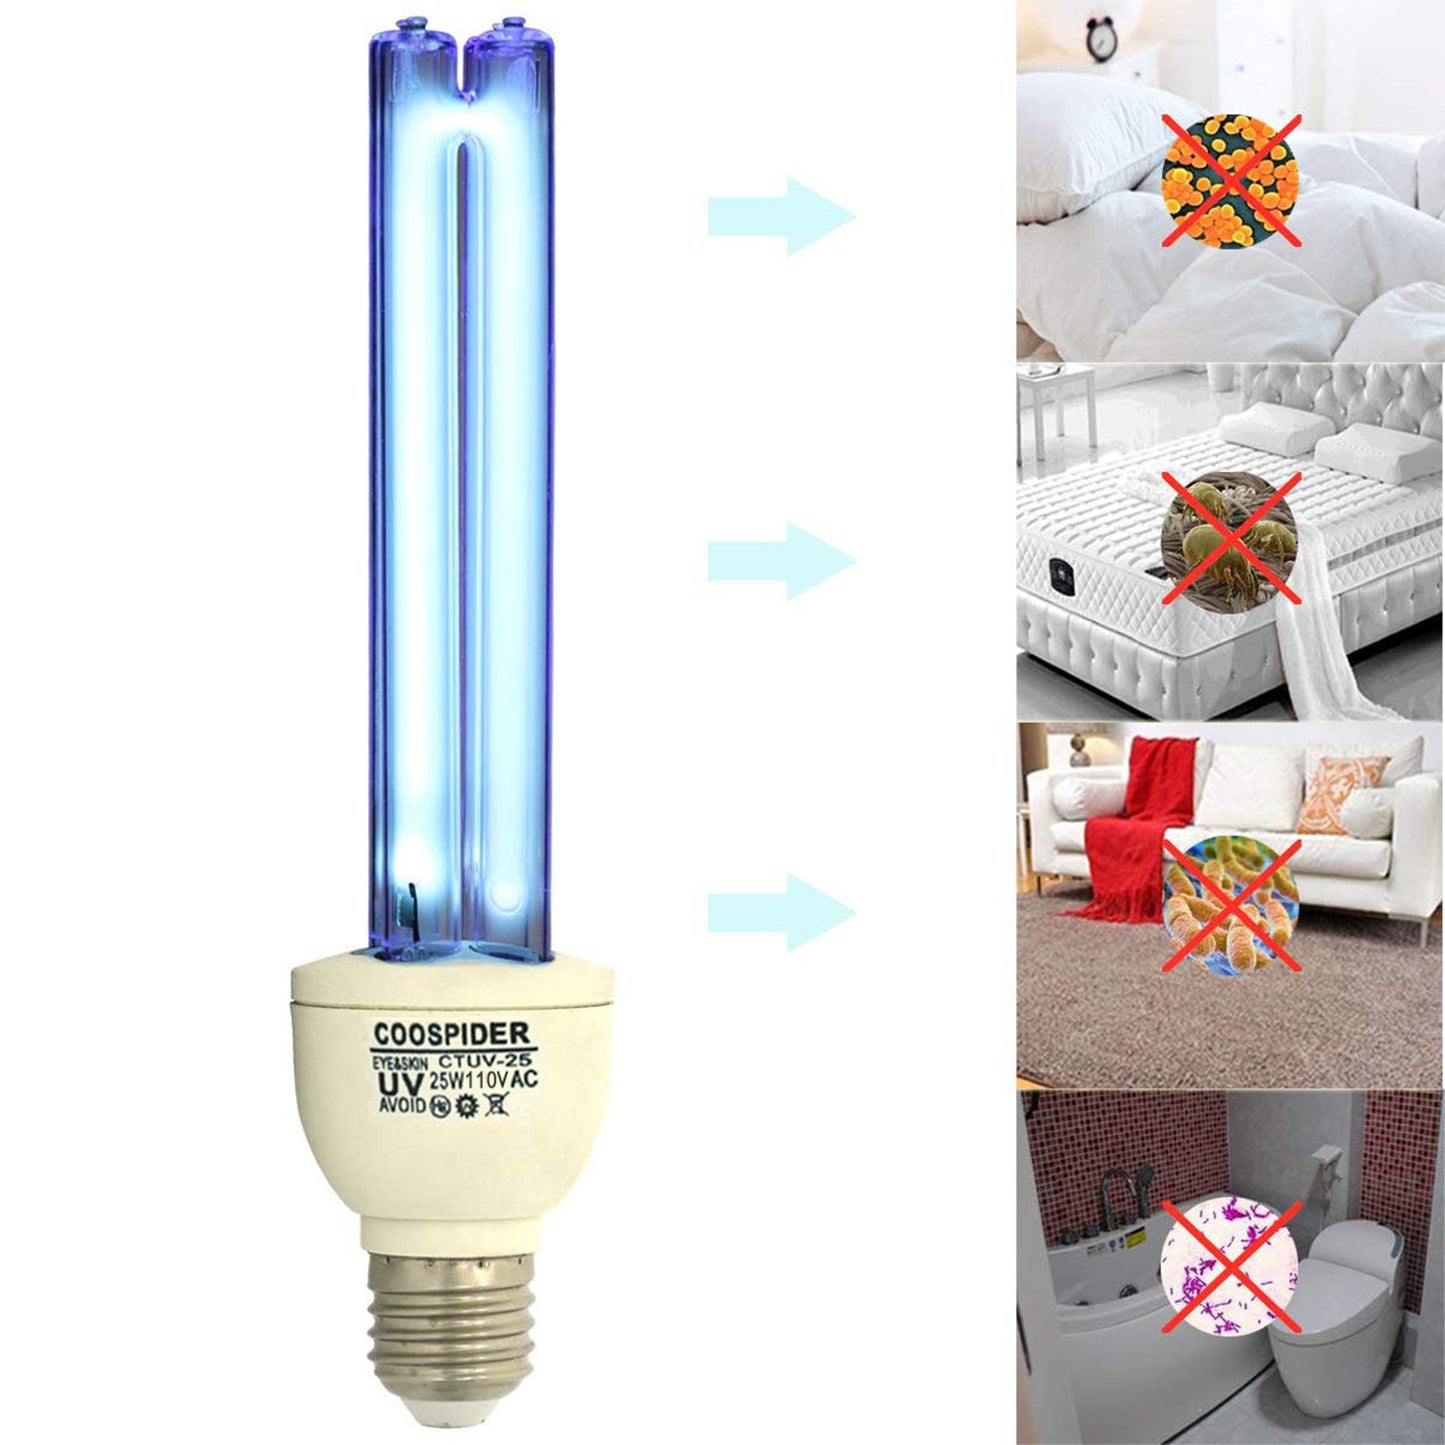 Water Master - WG-8D UV Light Bulb for Germicidal Water Treatment